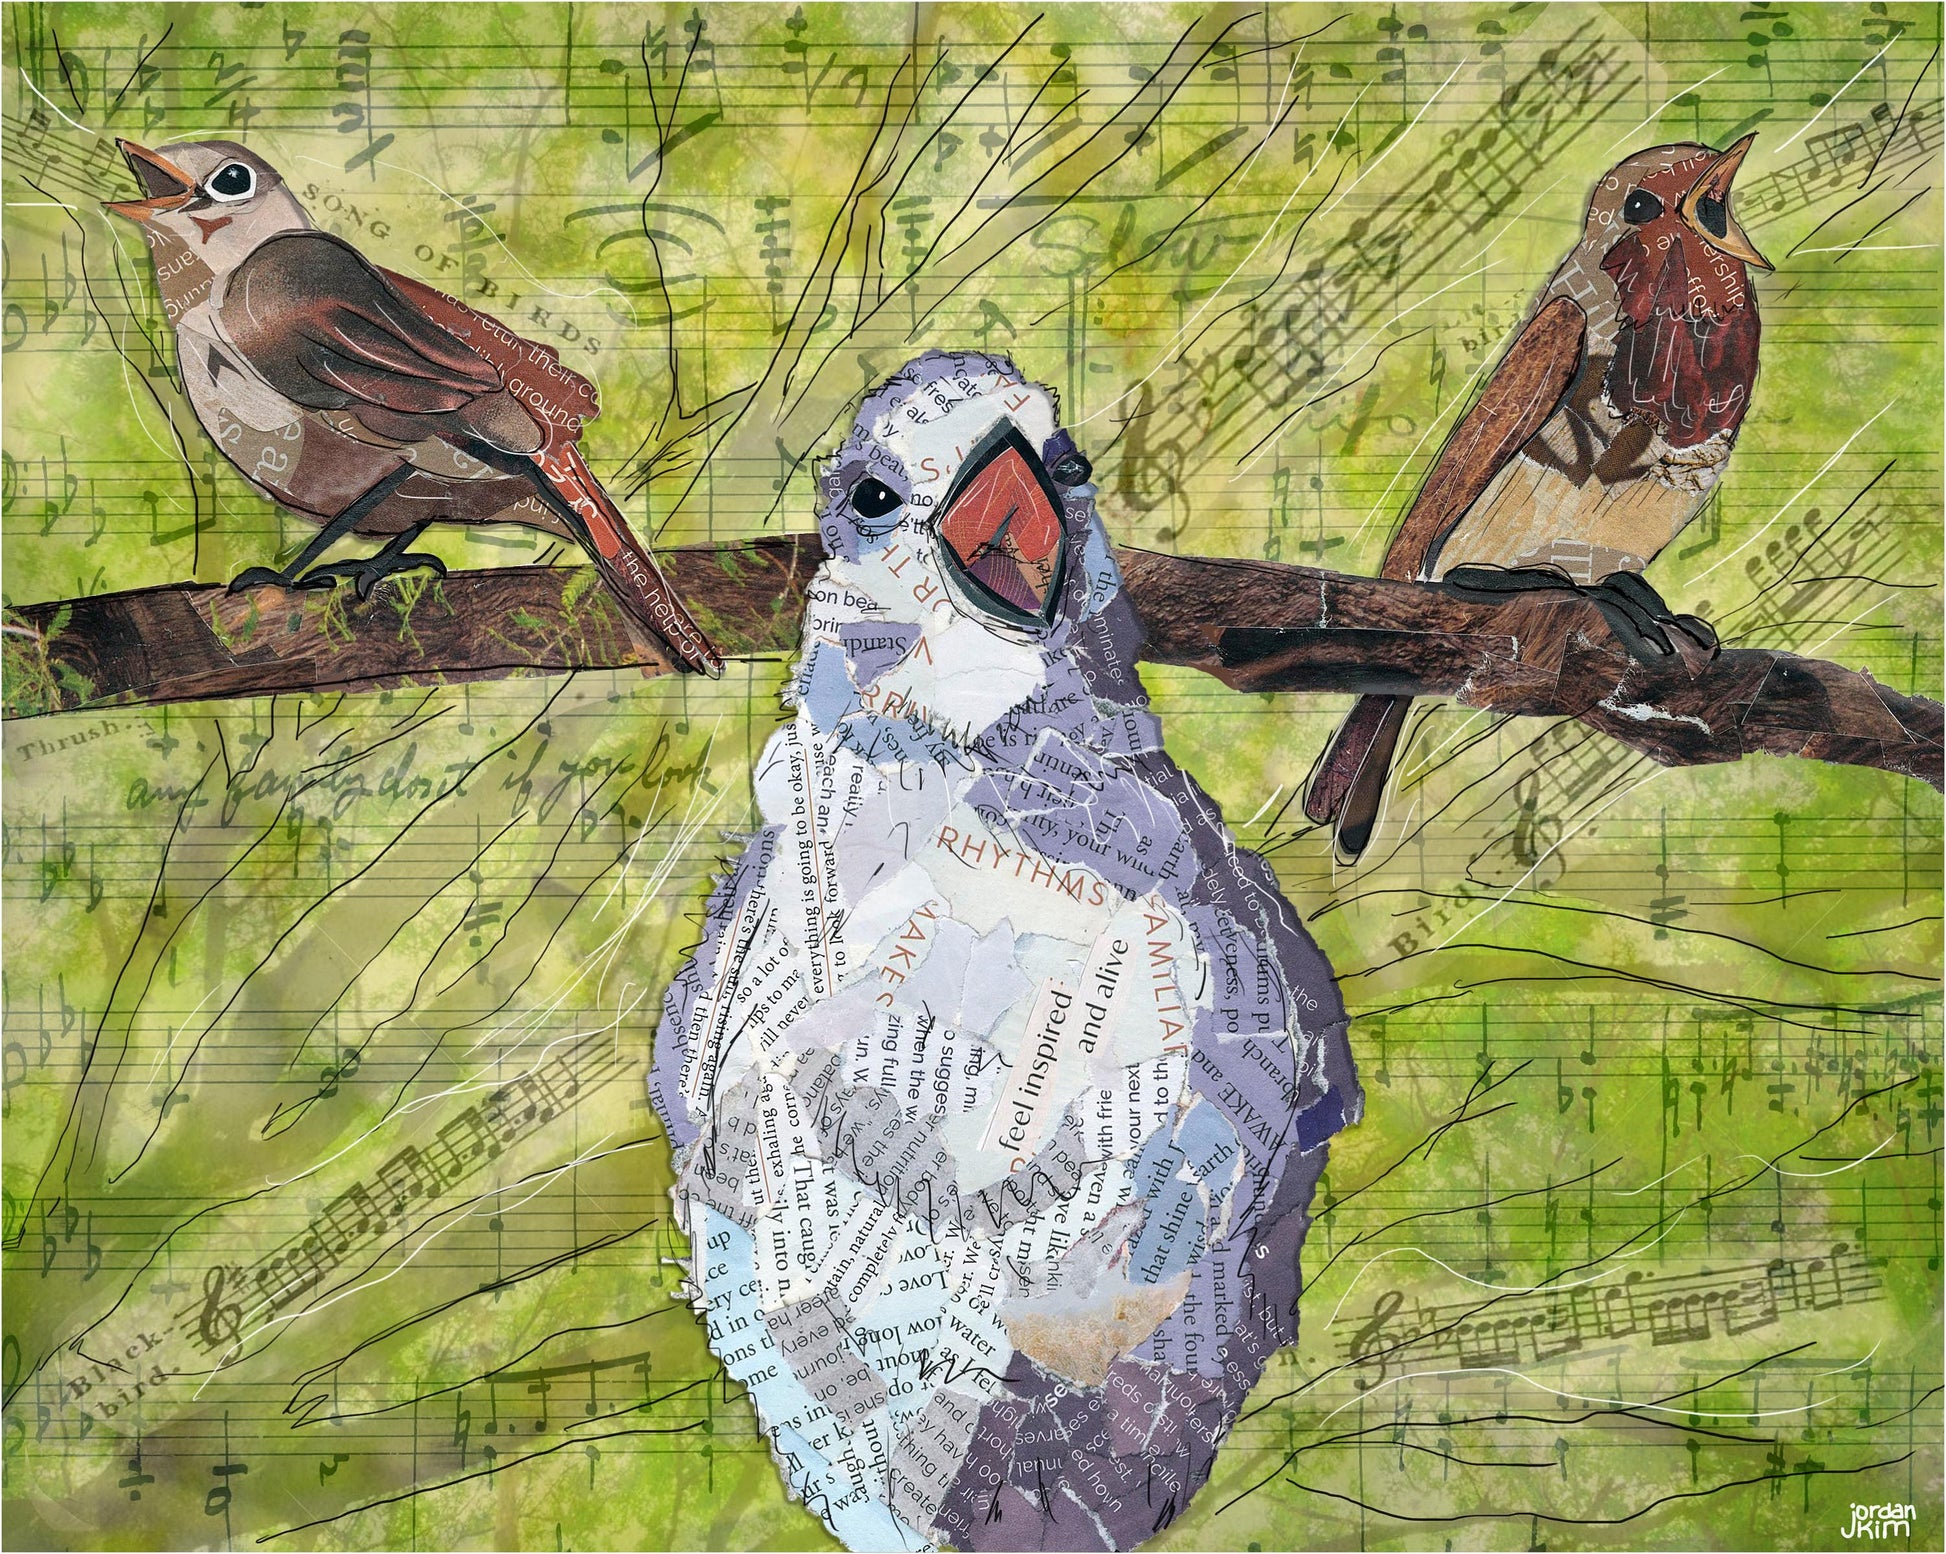 Greeting Card of a mixed media collage of birds singing in the tree branches made of sheet music - green, music - blank inside